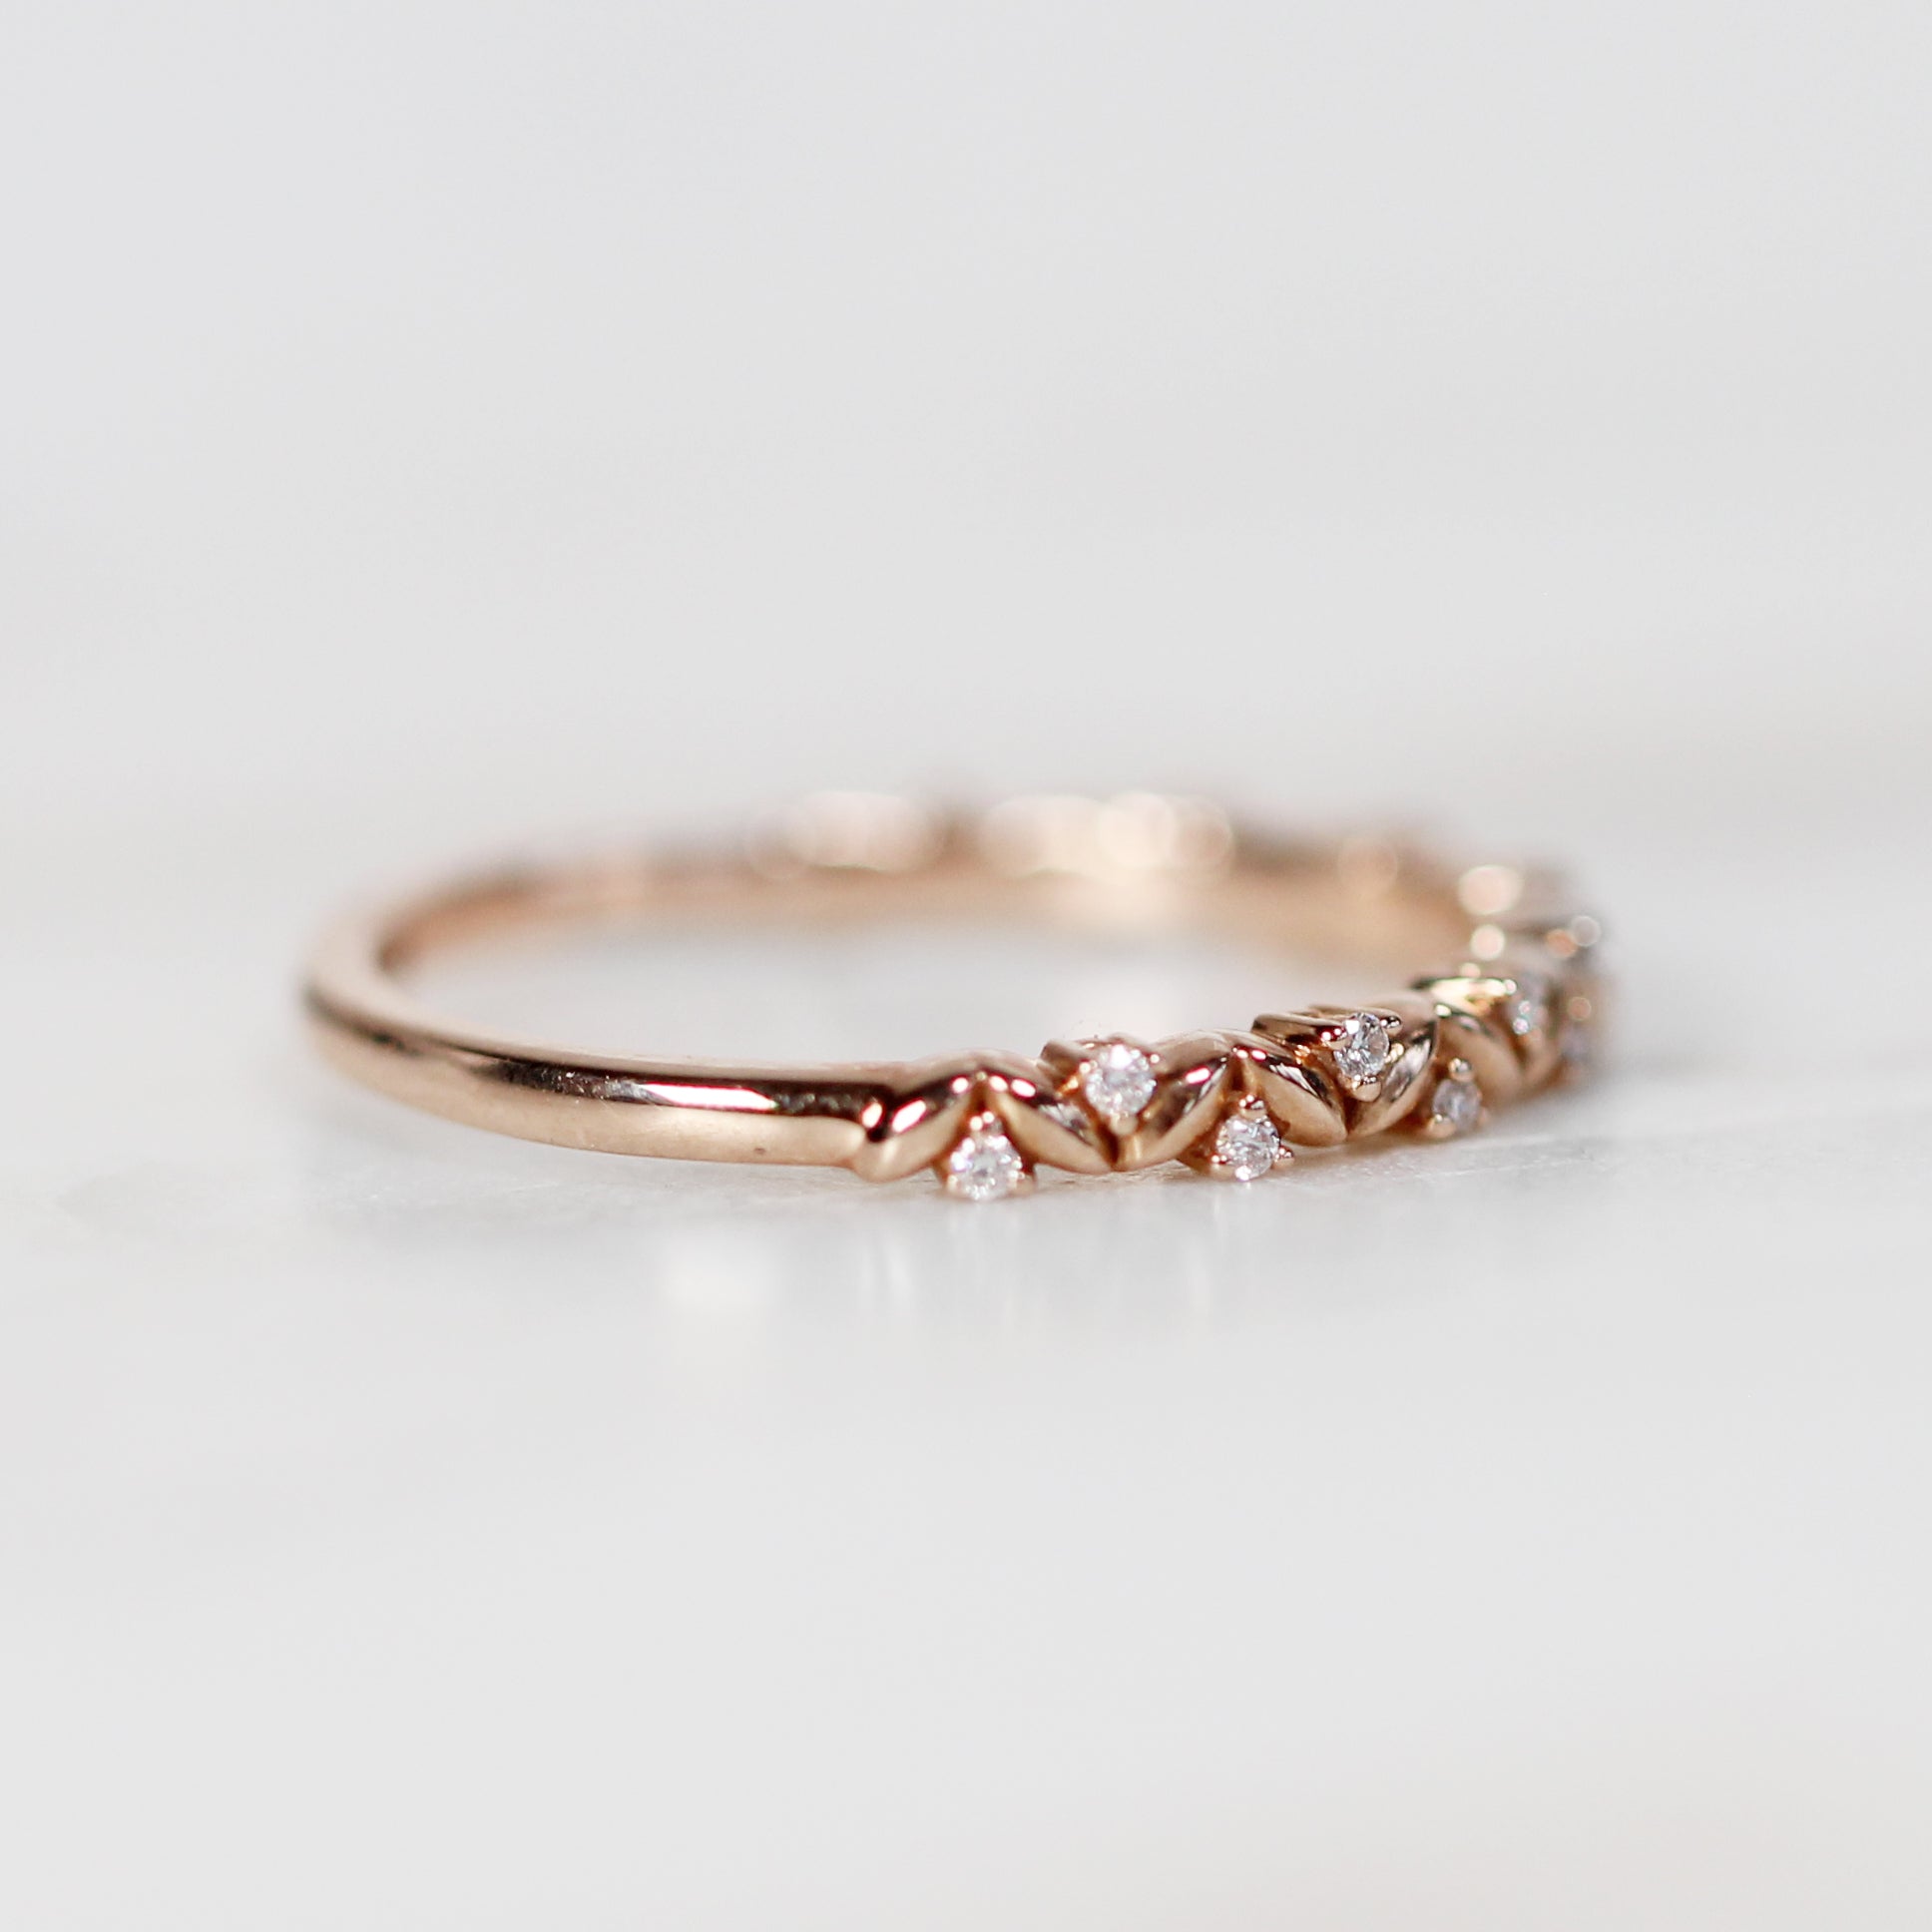 Brynn - Natural Floral Leaf Diamond Wedding or Stacking Ring Band - Midwinter Co. Alternative Bridal Rings and Modern Fine Jewelry